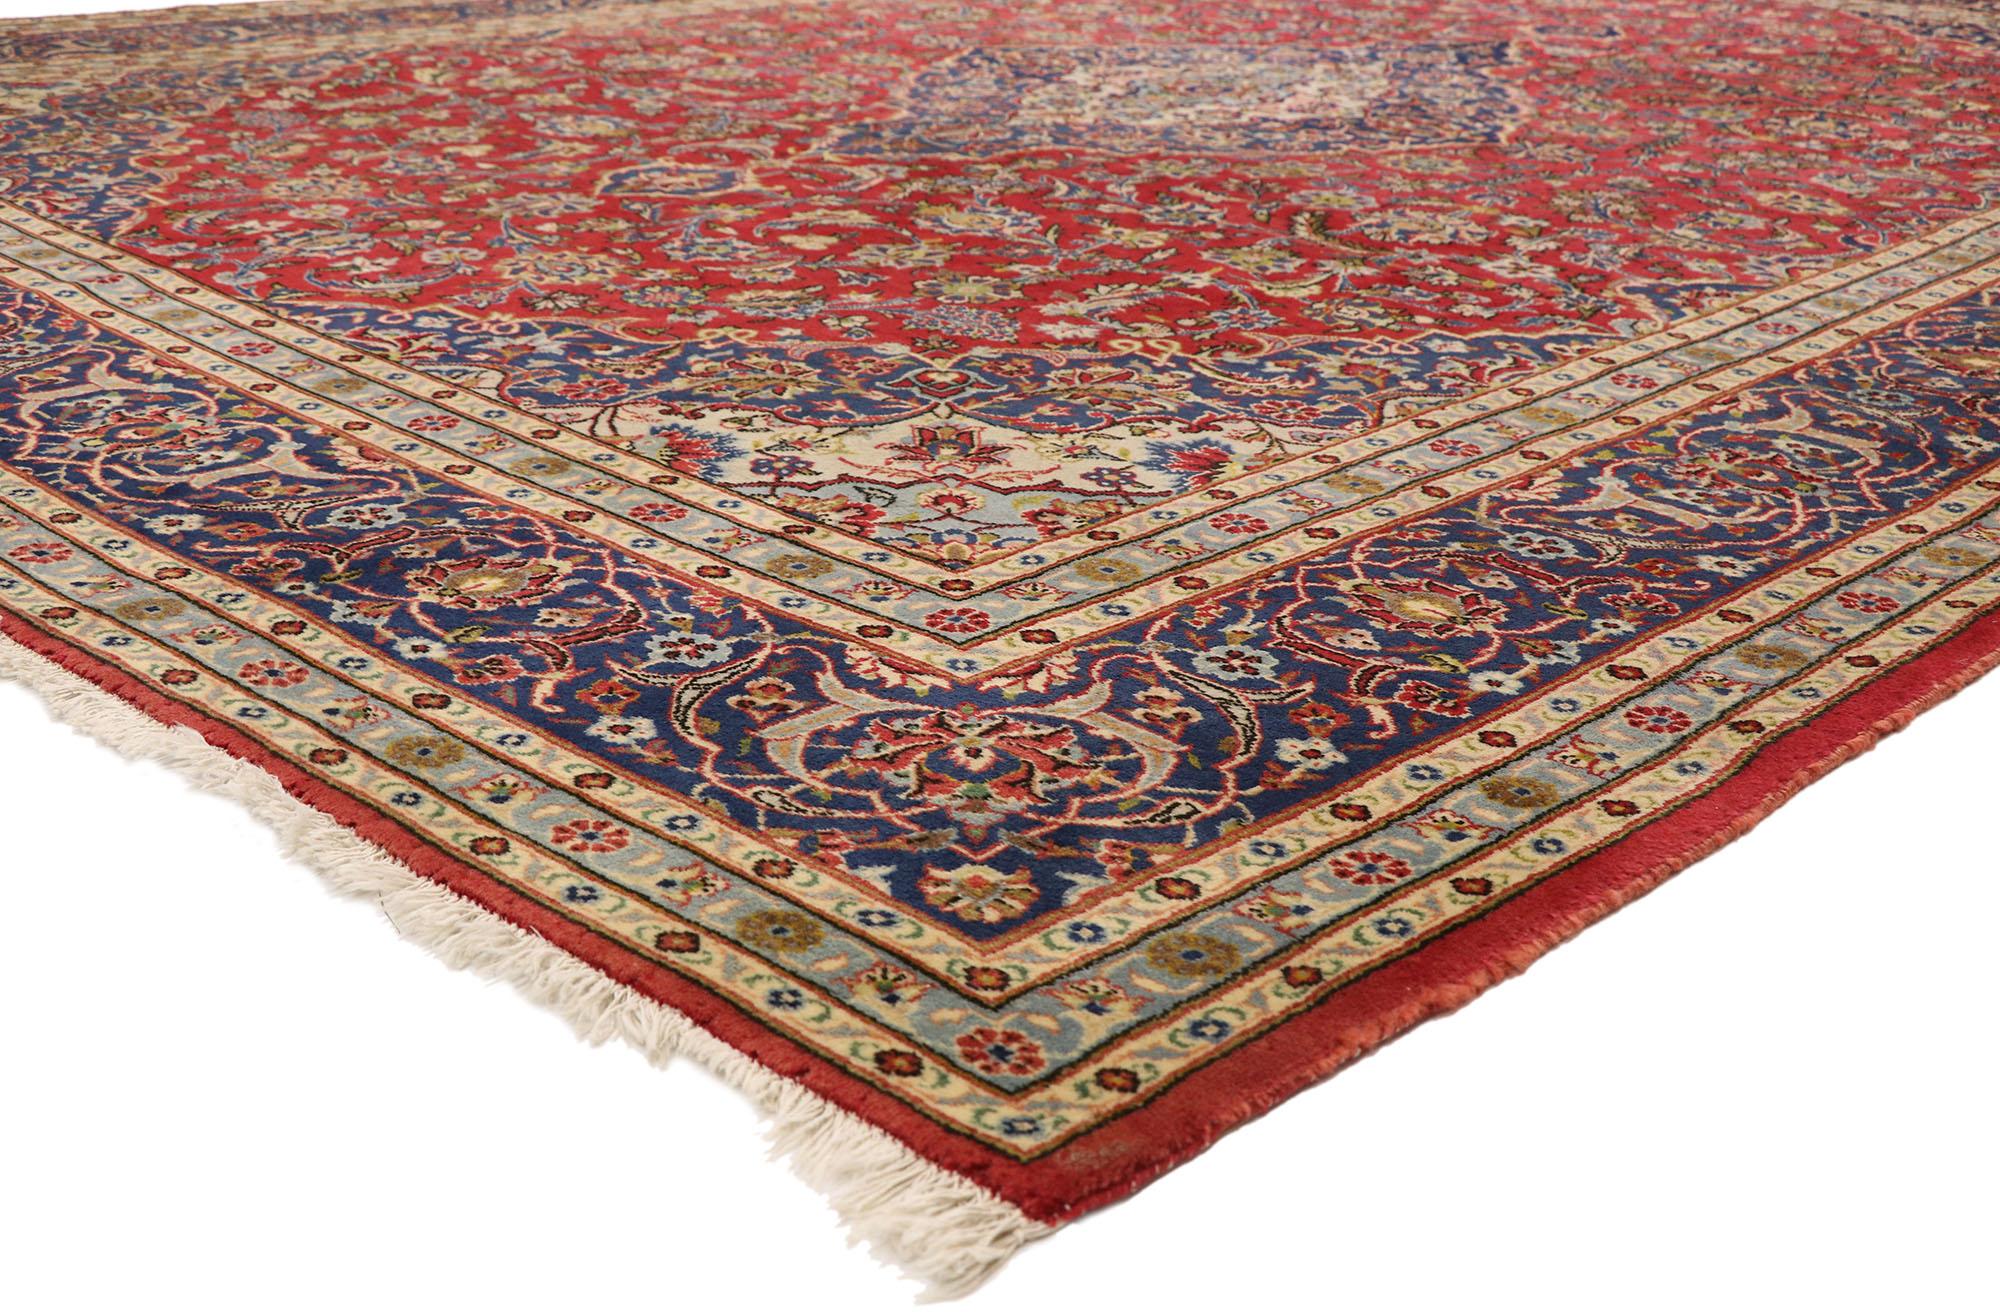 77420 Vintage Persian Kashan Rug with Federal American Colonial Style 09'08 x 12'11. This hand knotted wool vintage Persian Kashan area rug with traditional style features a lobed tricolor diamond medallion anchored with palmette finials at either